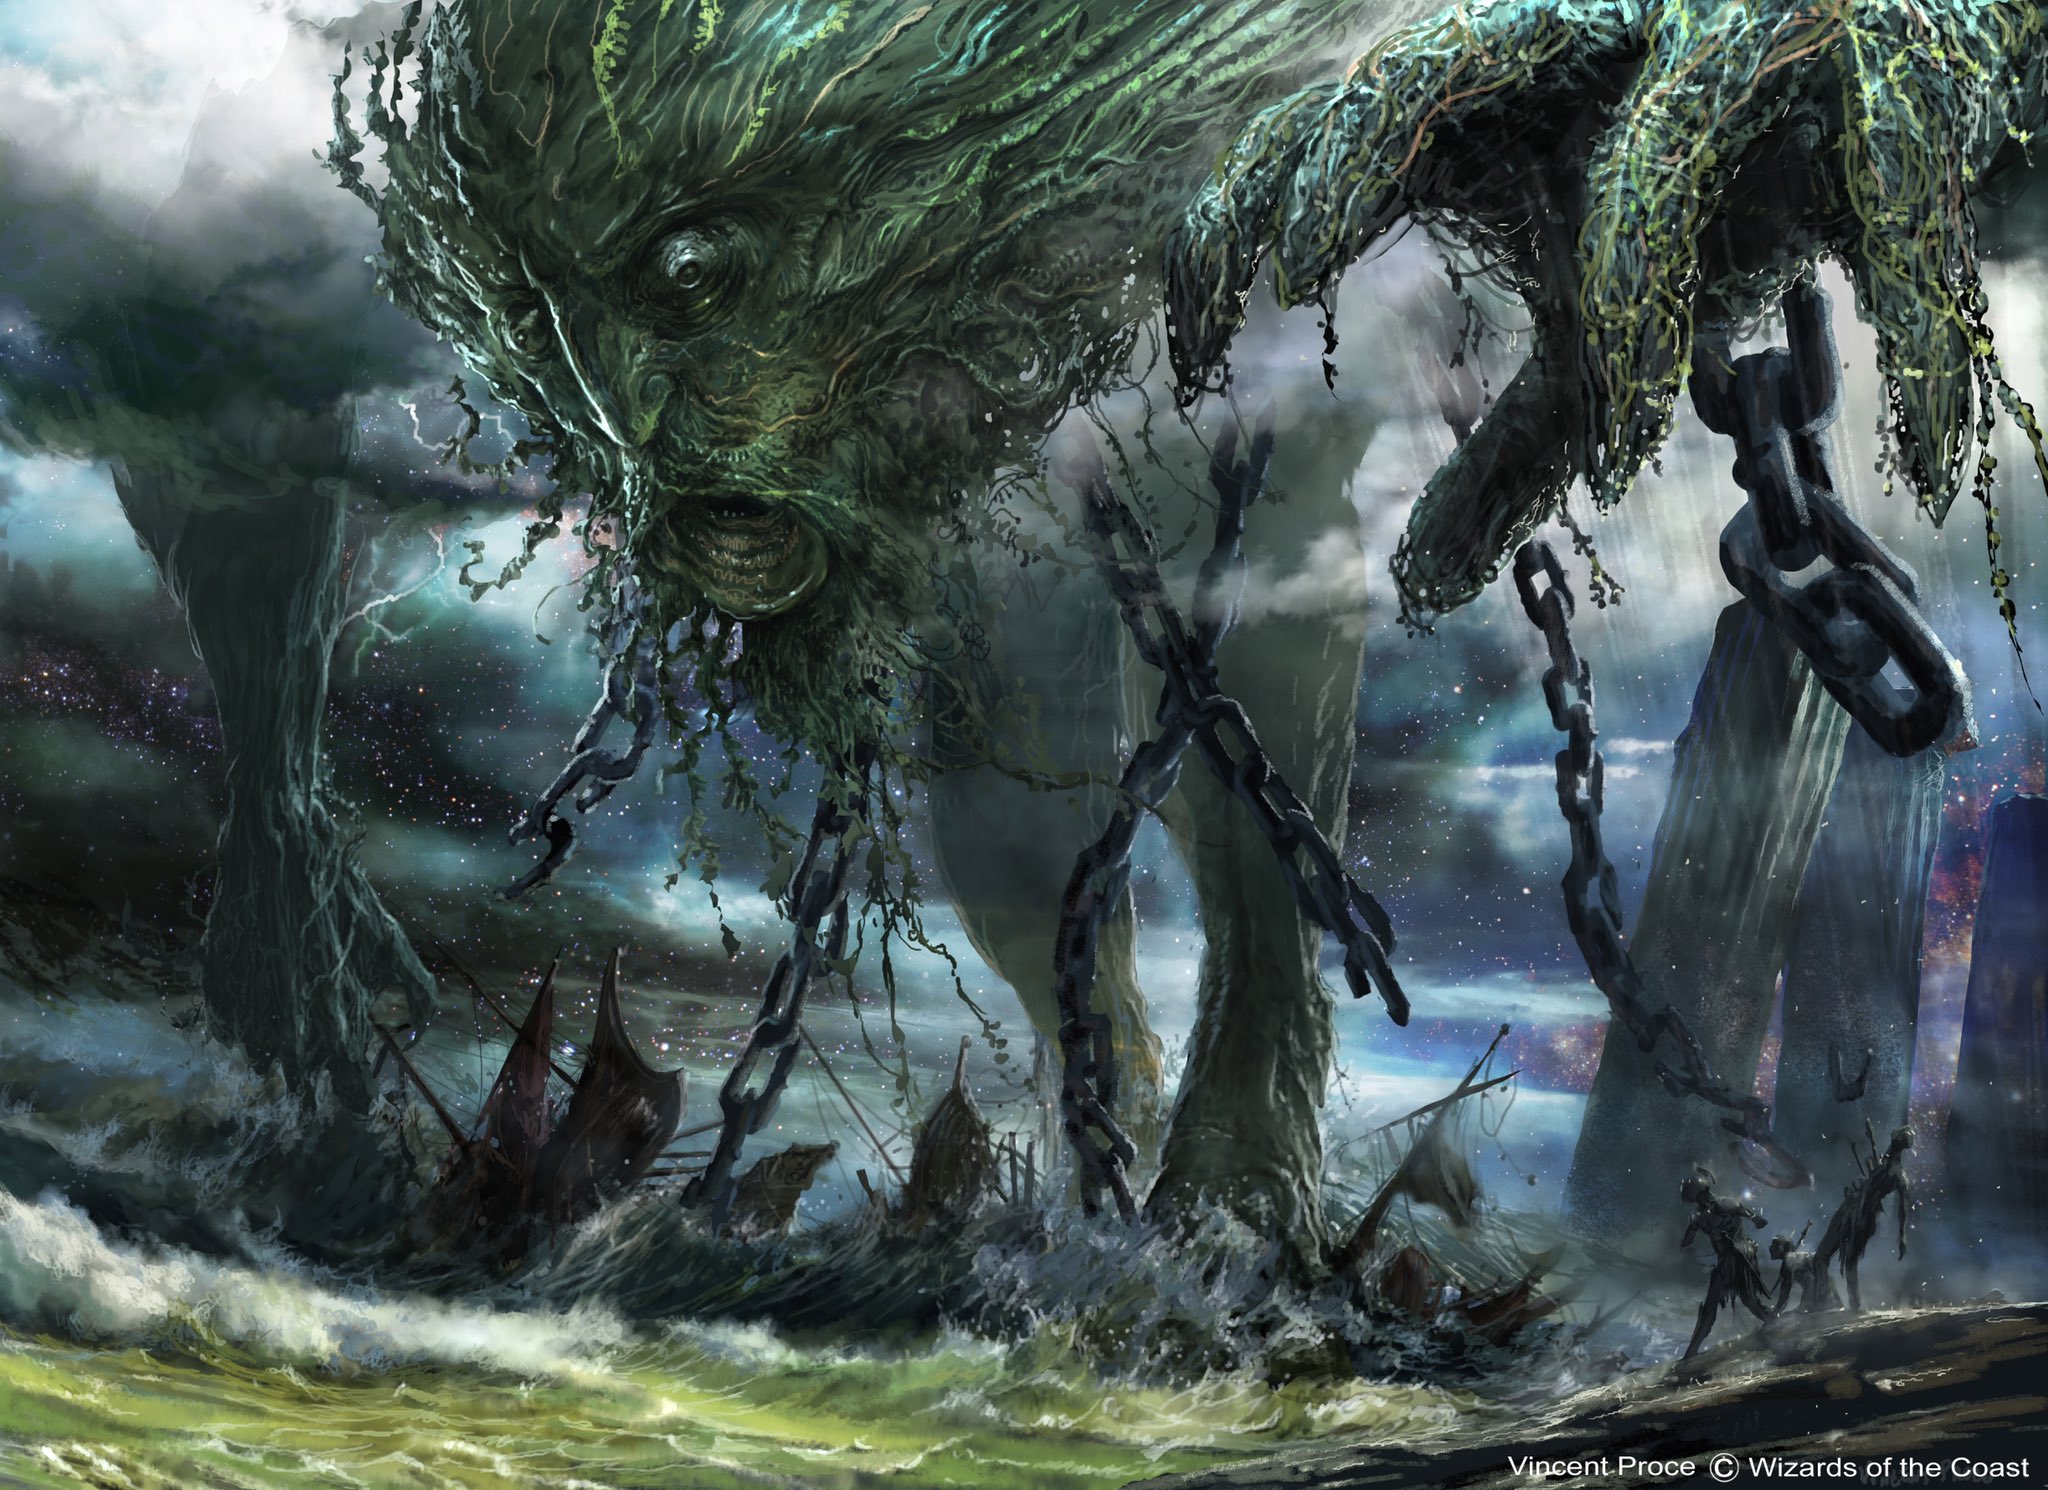 Is Modern Still A Format Dominated By Uro, Titan of Nature’s Wrath?